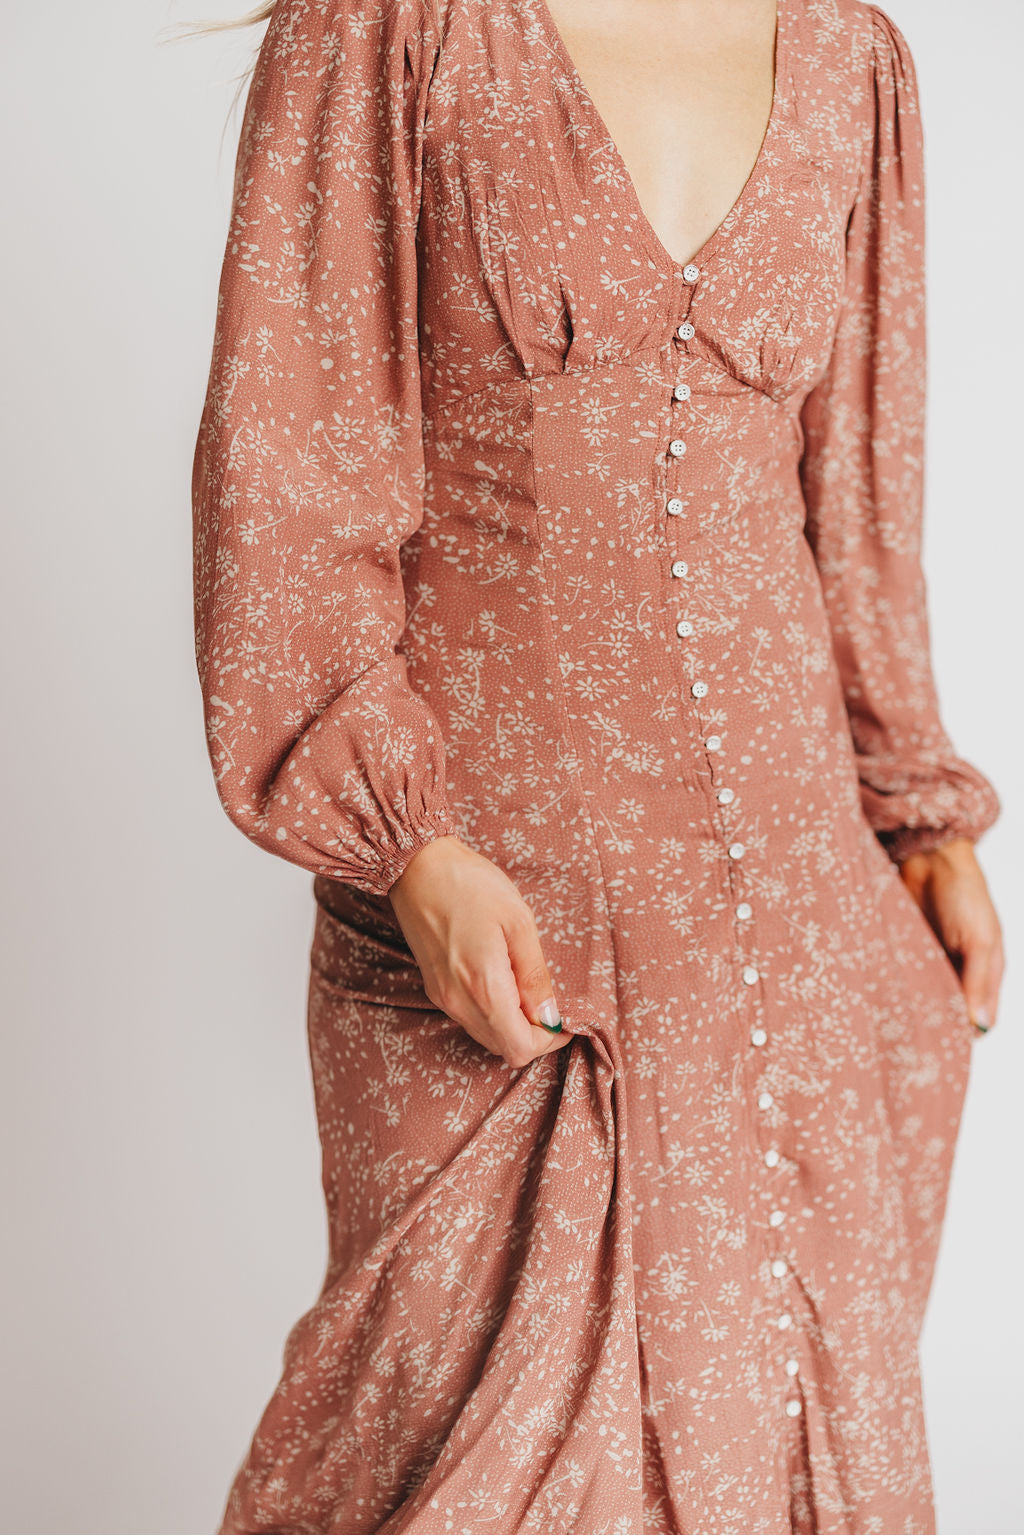 Brandi Long-Sleeve Button-Up Maxi Dress in Rosewood Floral